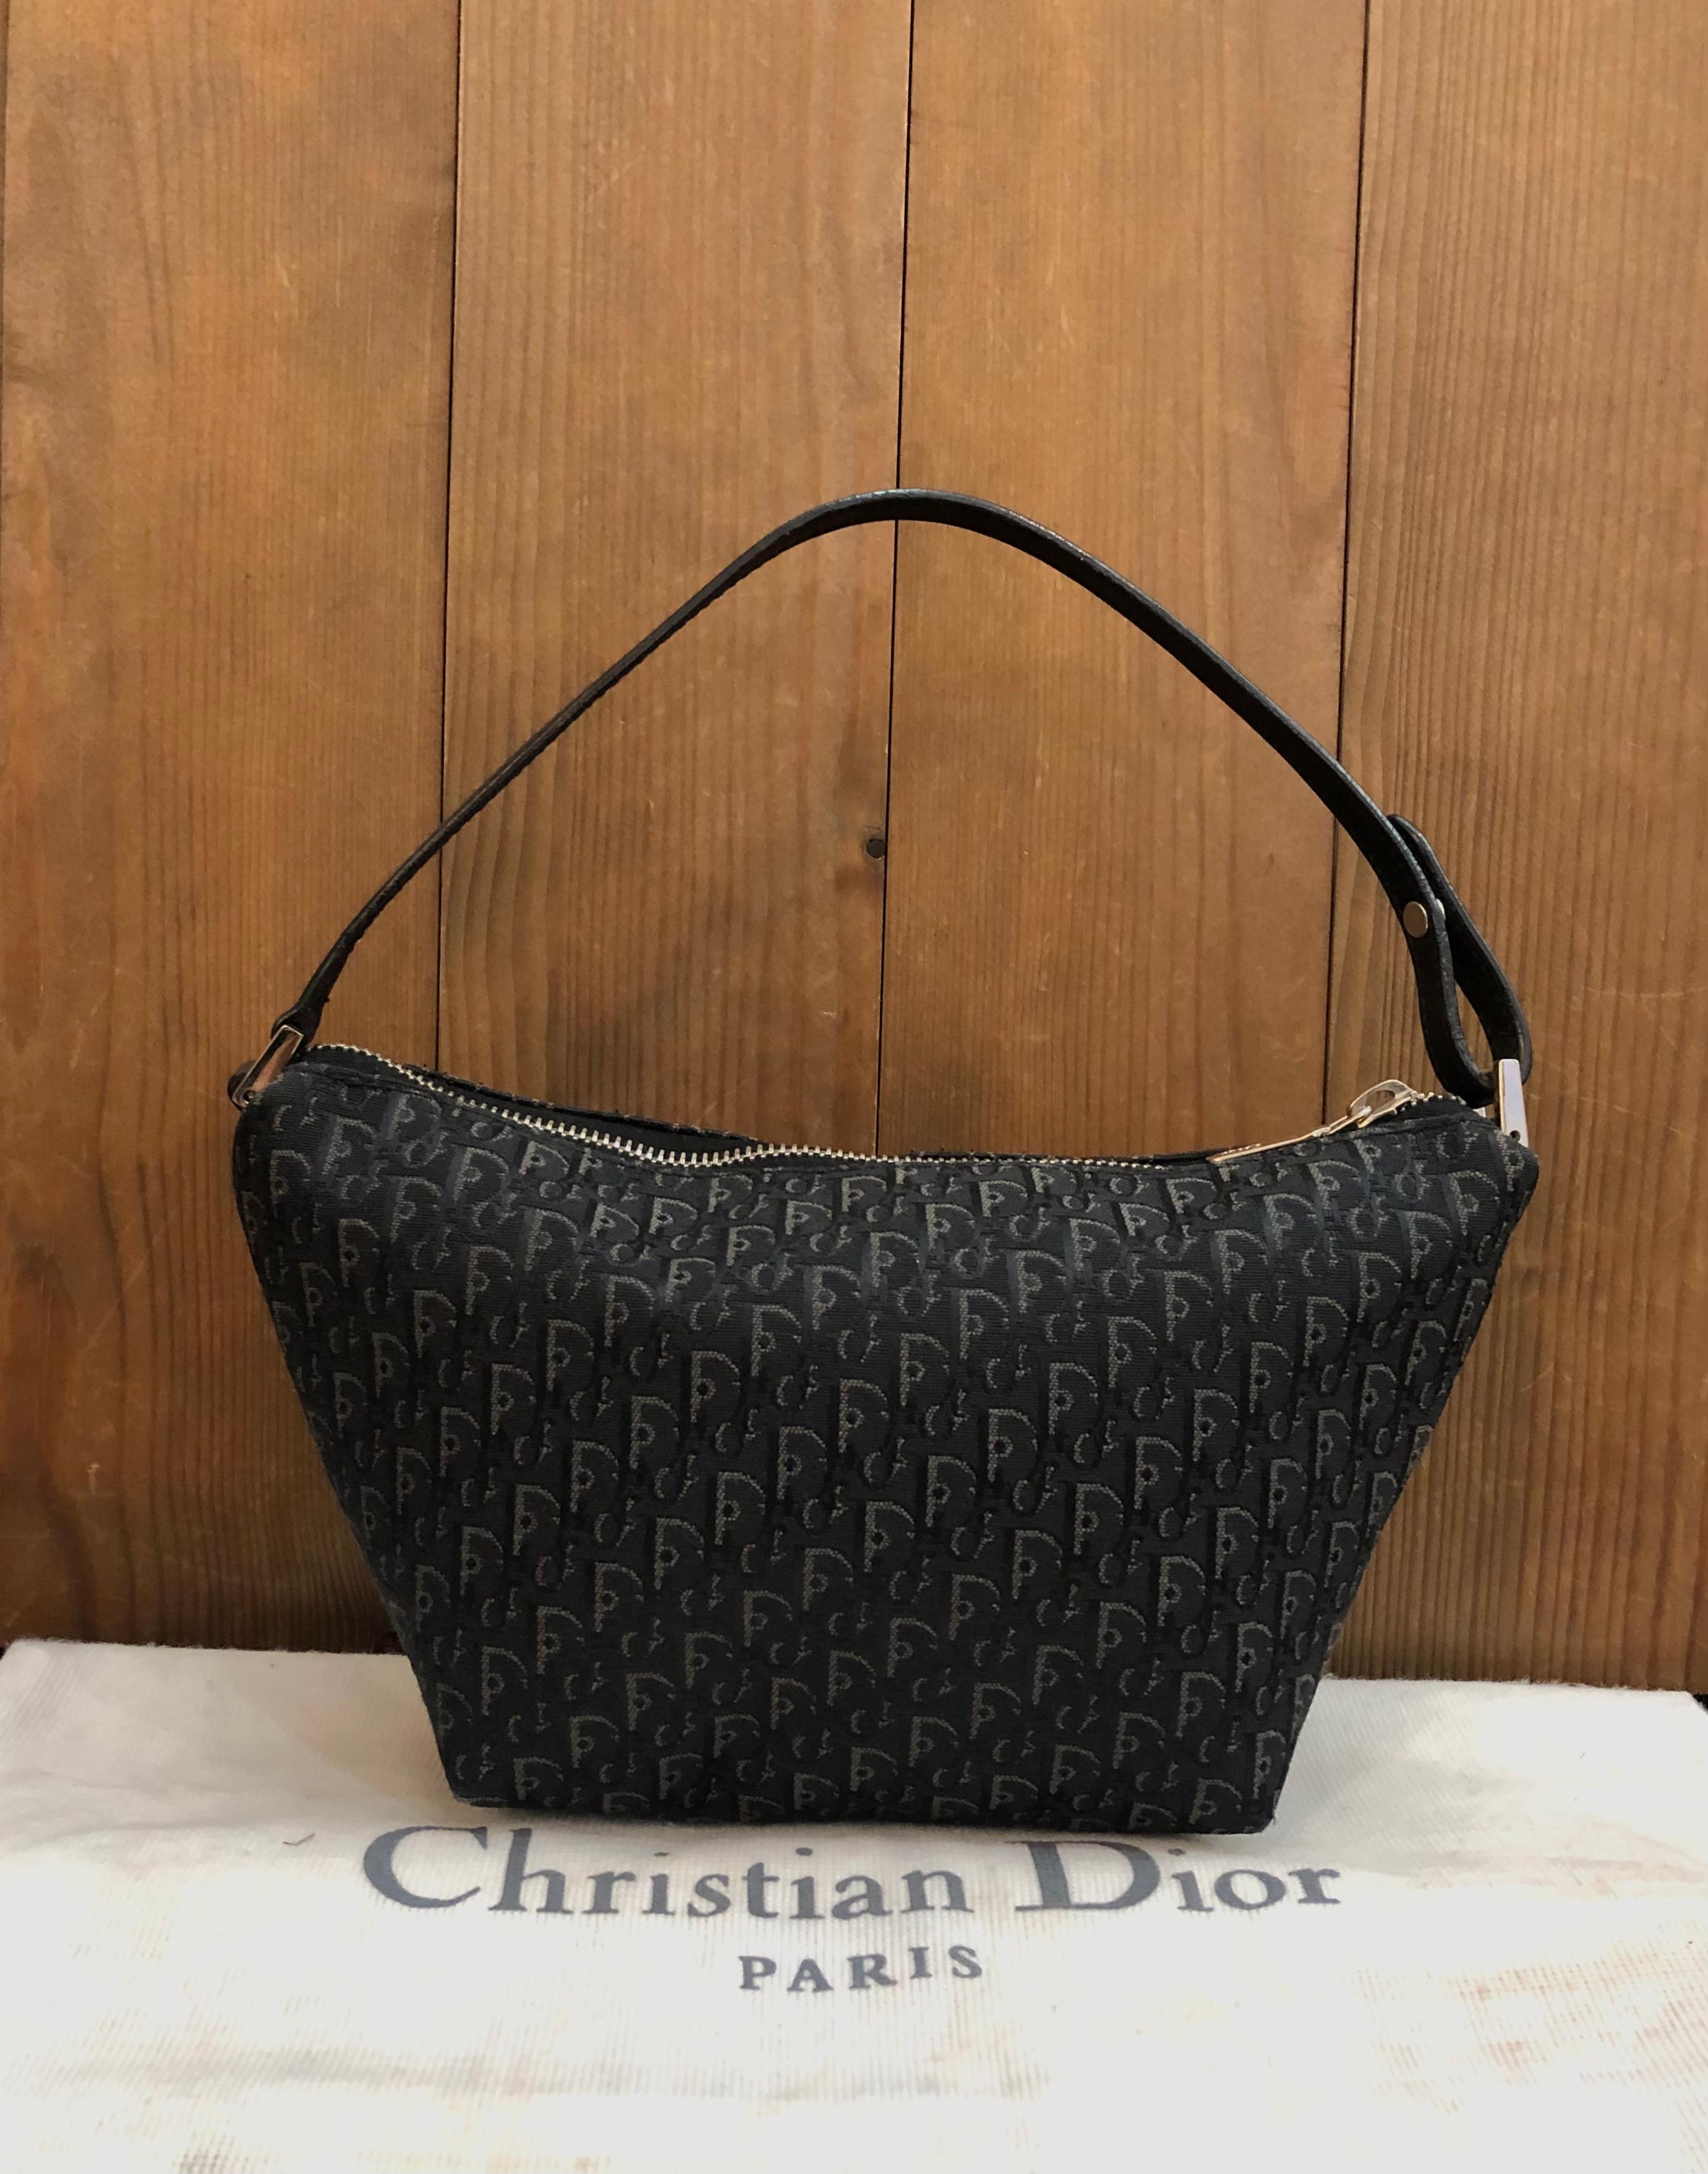 This vintage Christian Dior pouch handbag is crafted of Dior’s micro trotter jacquard and leather in black featuring silver toned hardware. Top zipper closure opens an unlined coated interior. Made in Spain MC 0063. Measures approximately 9 (top) 5